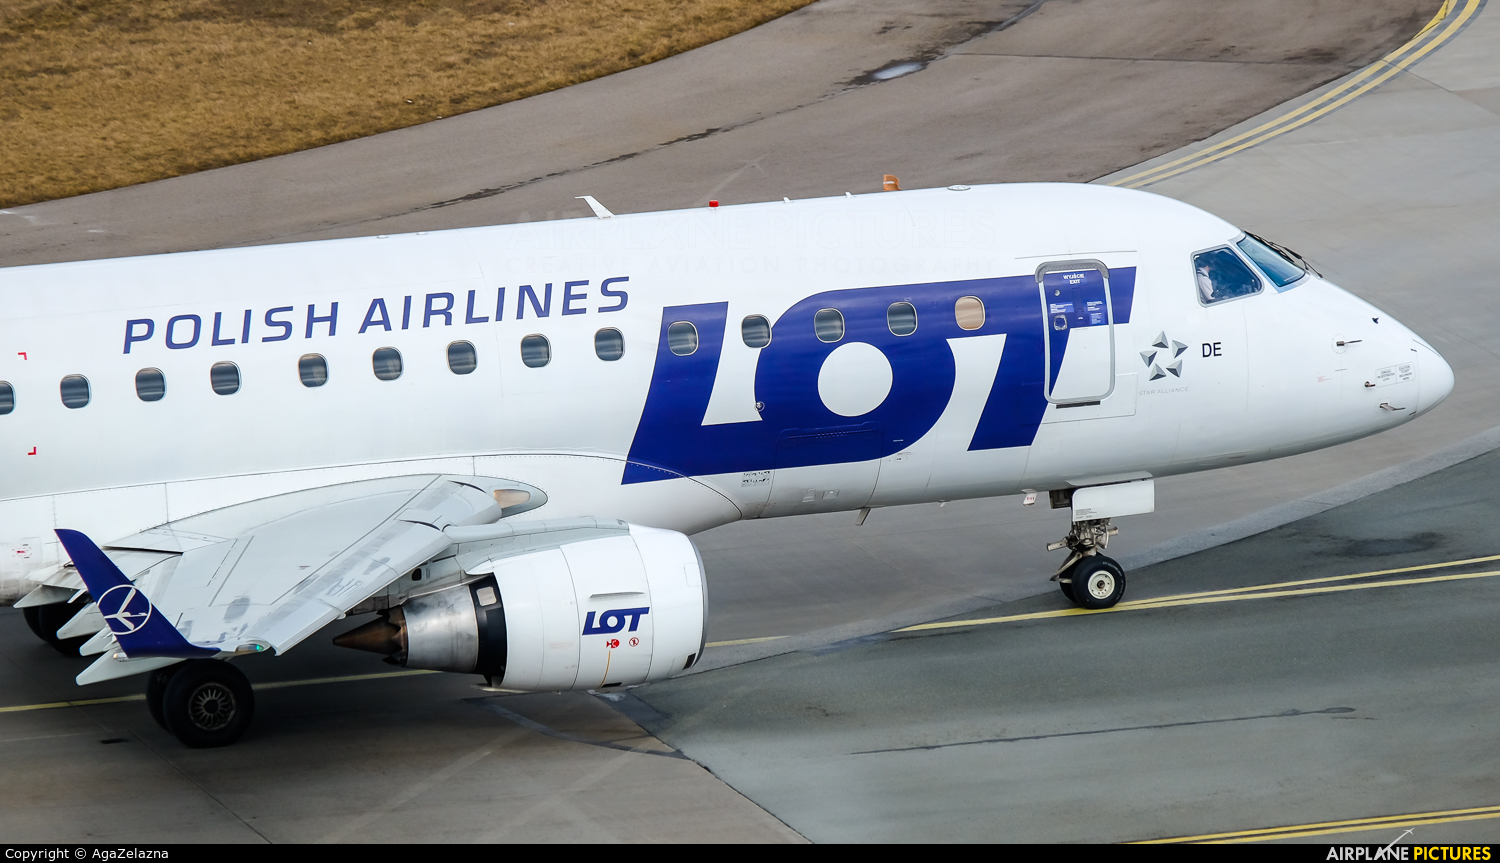 LOT - Polish Airlines SP-LDE aircraft at Katowice - Pyrzowice